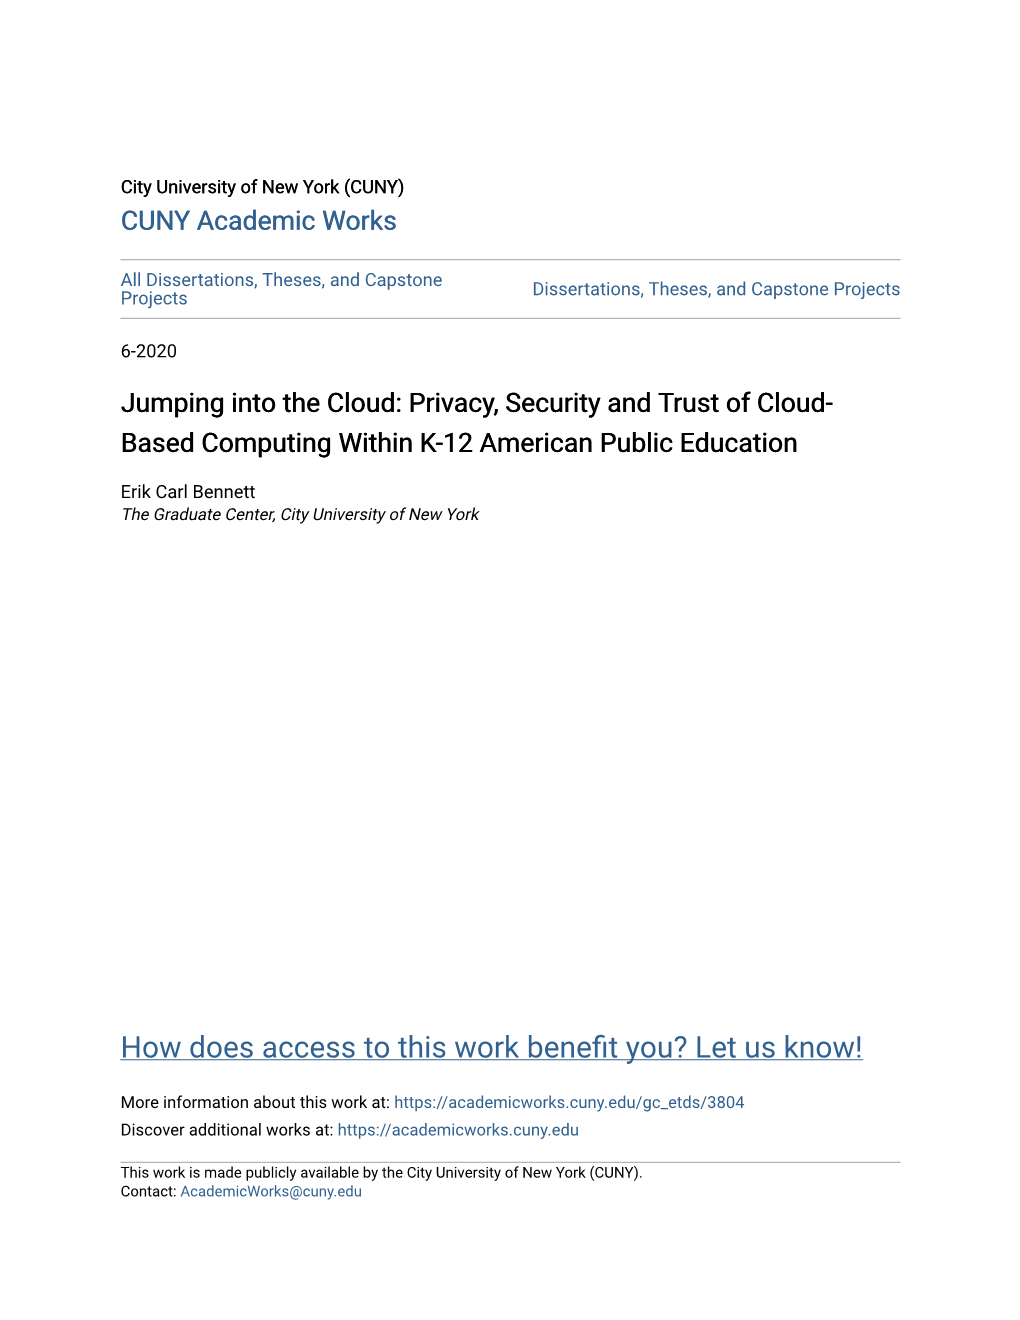 Privacy, Security and Trust of Cloud-Based Computing Within K-12 American Public Education